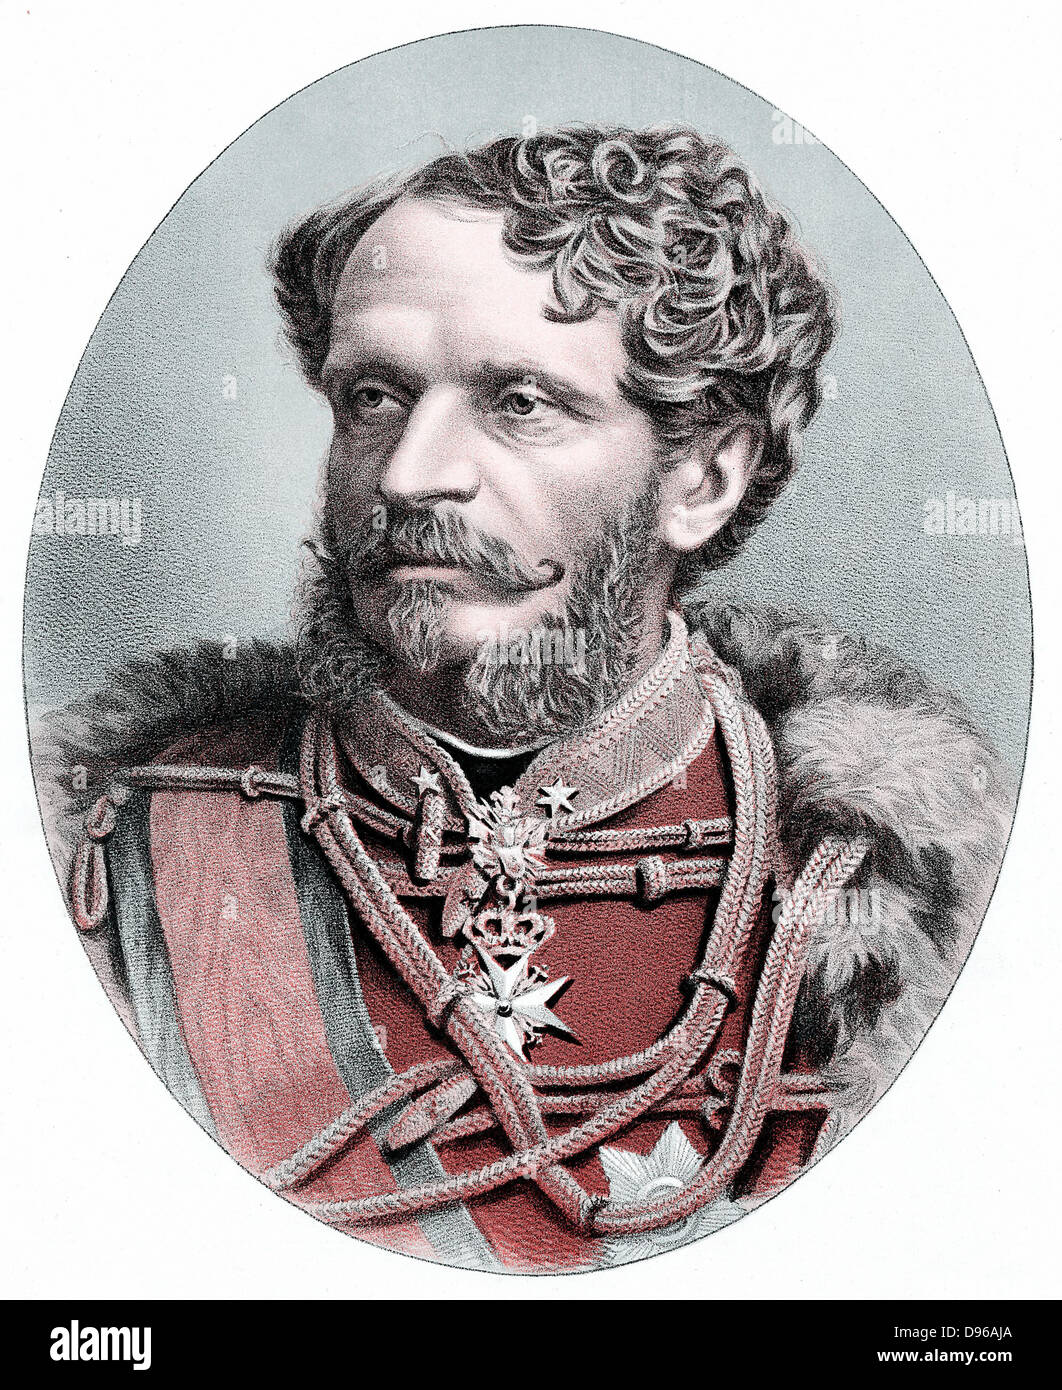 Count Julius Andrassy (1823-1890) Hungarian statesman, supporter of Kossuth and struggle for independence (1848-9). In exile until 1858; Prime Minister of Hungary 1867. Tinted lithograph published  c1880. Stock Photo